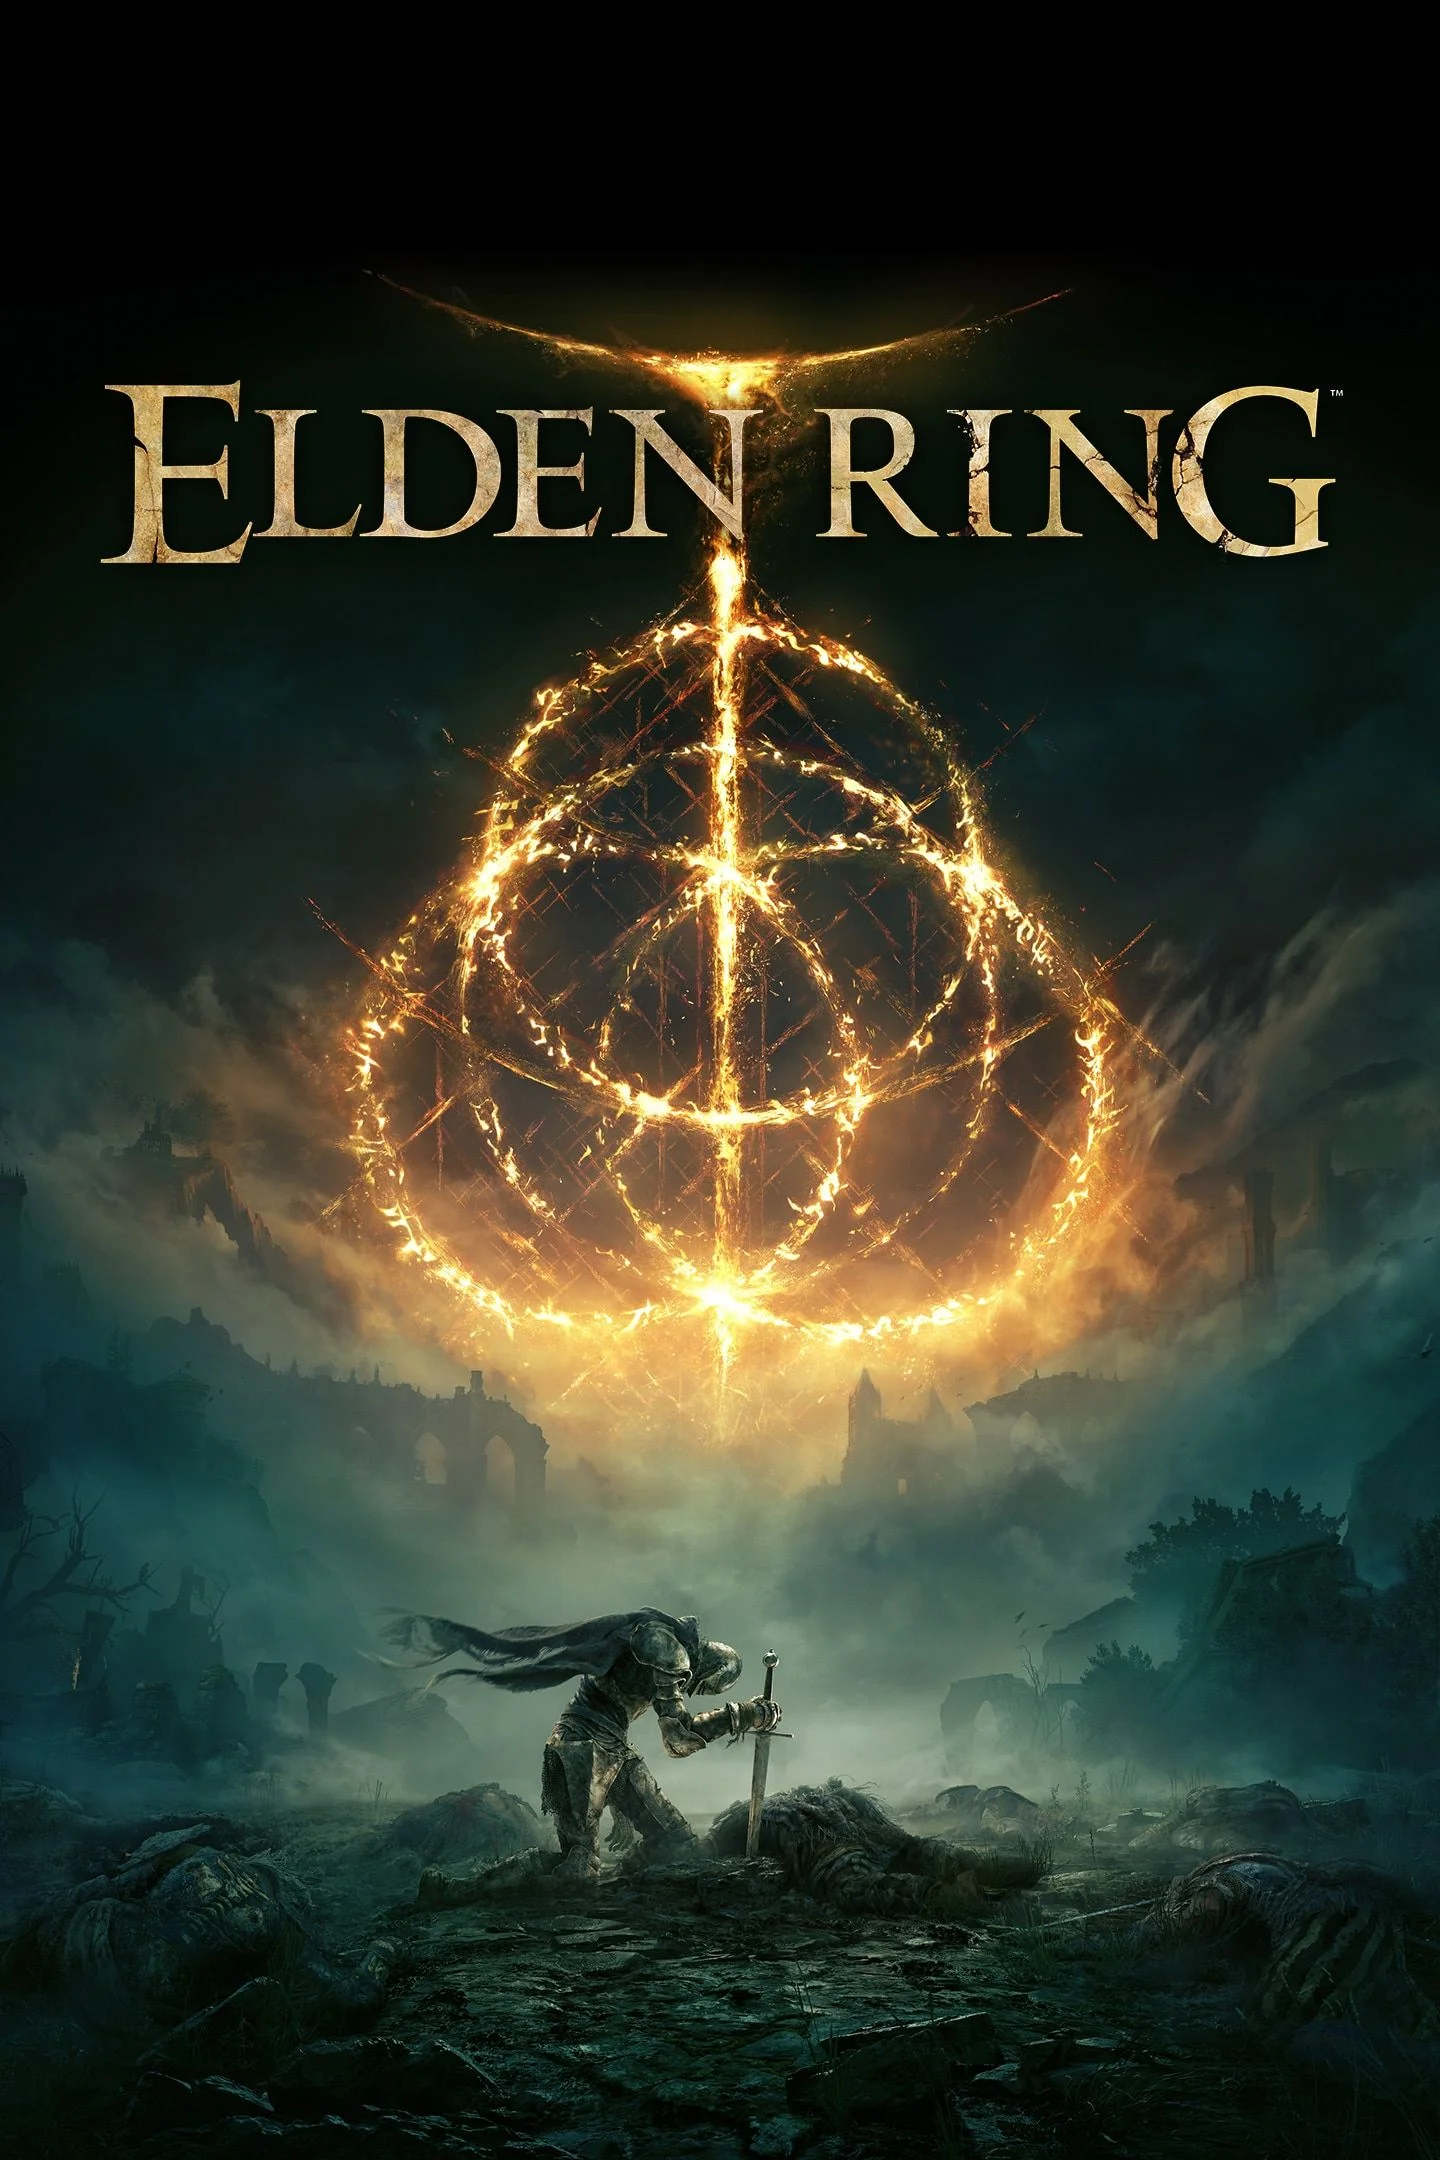 Elden Ring Gears Up for Shadow of the Erdtree DLC